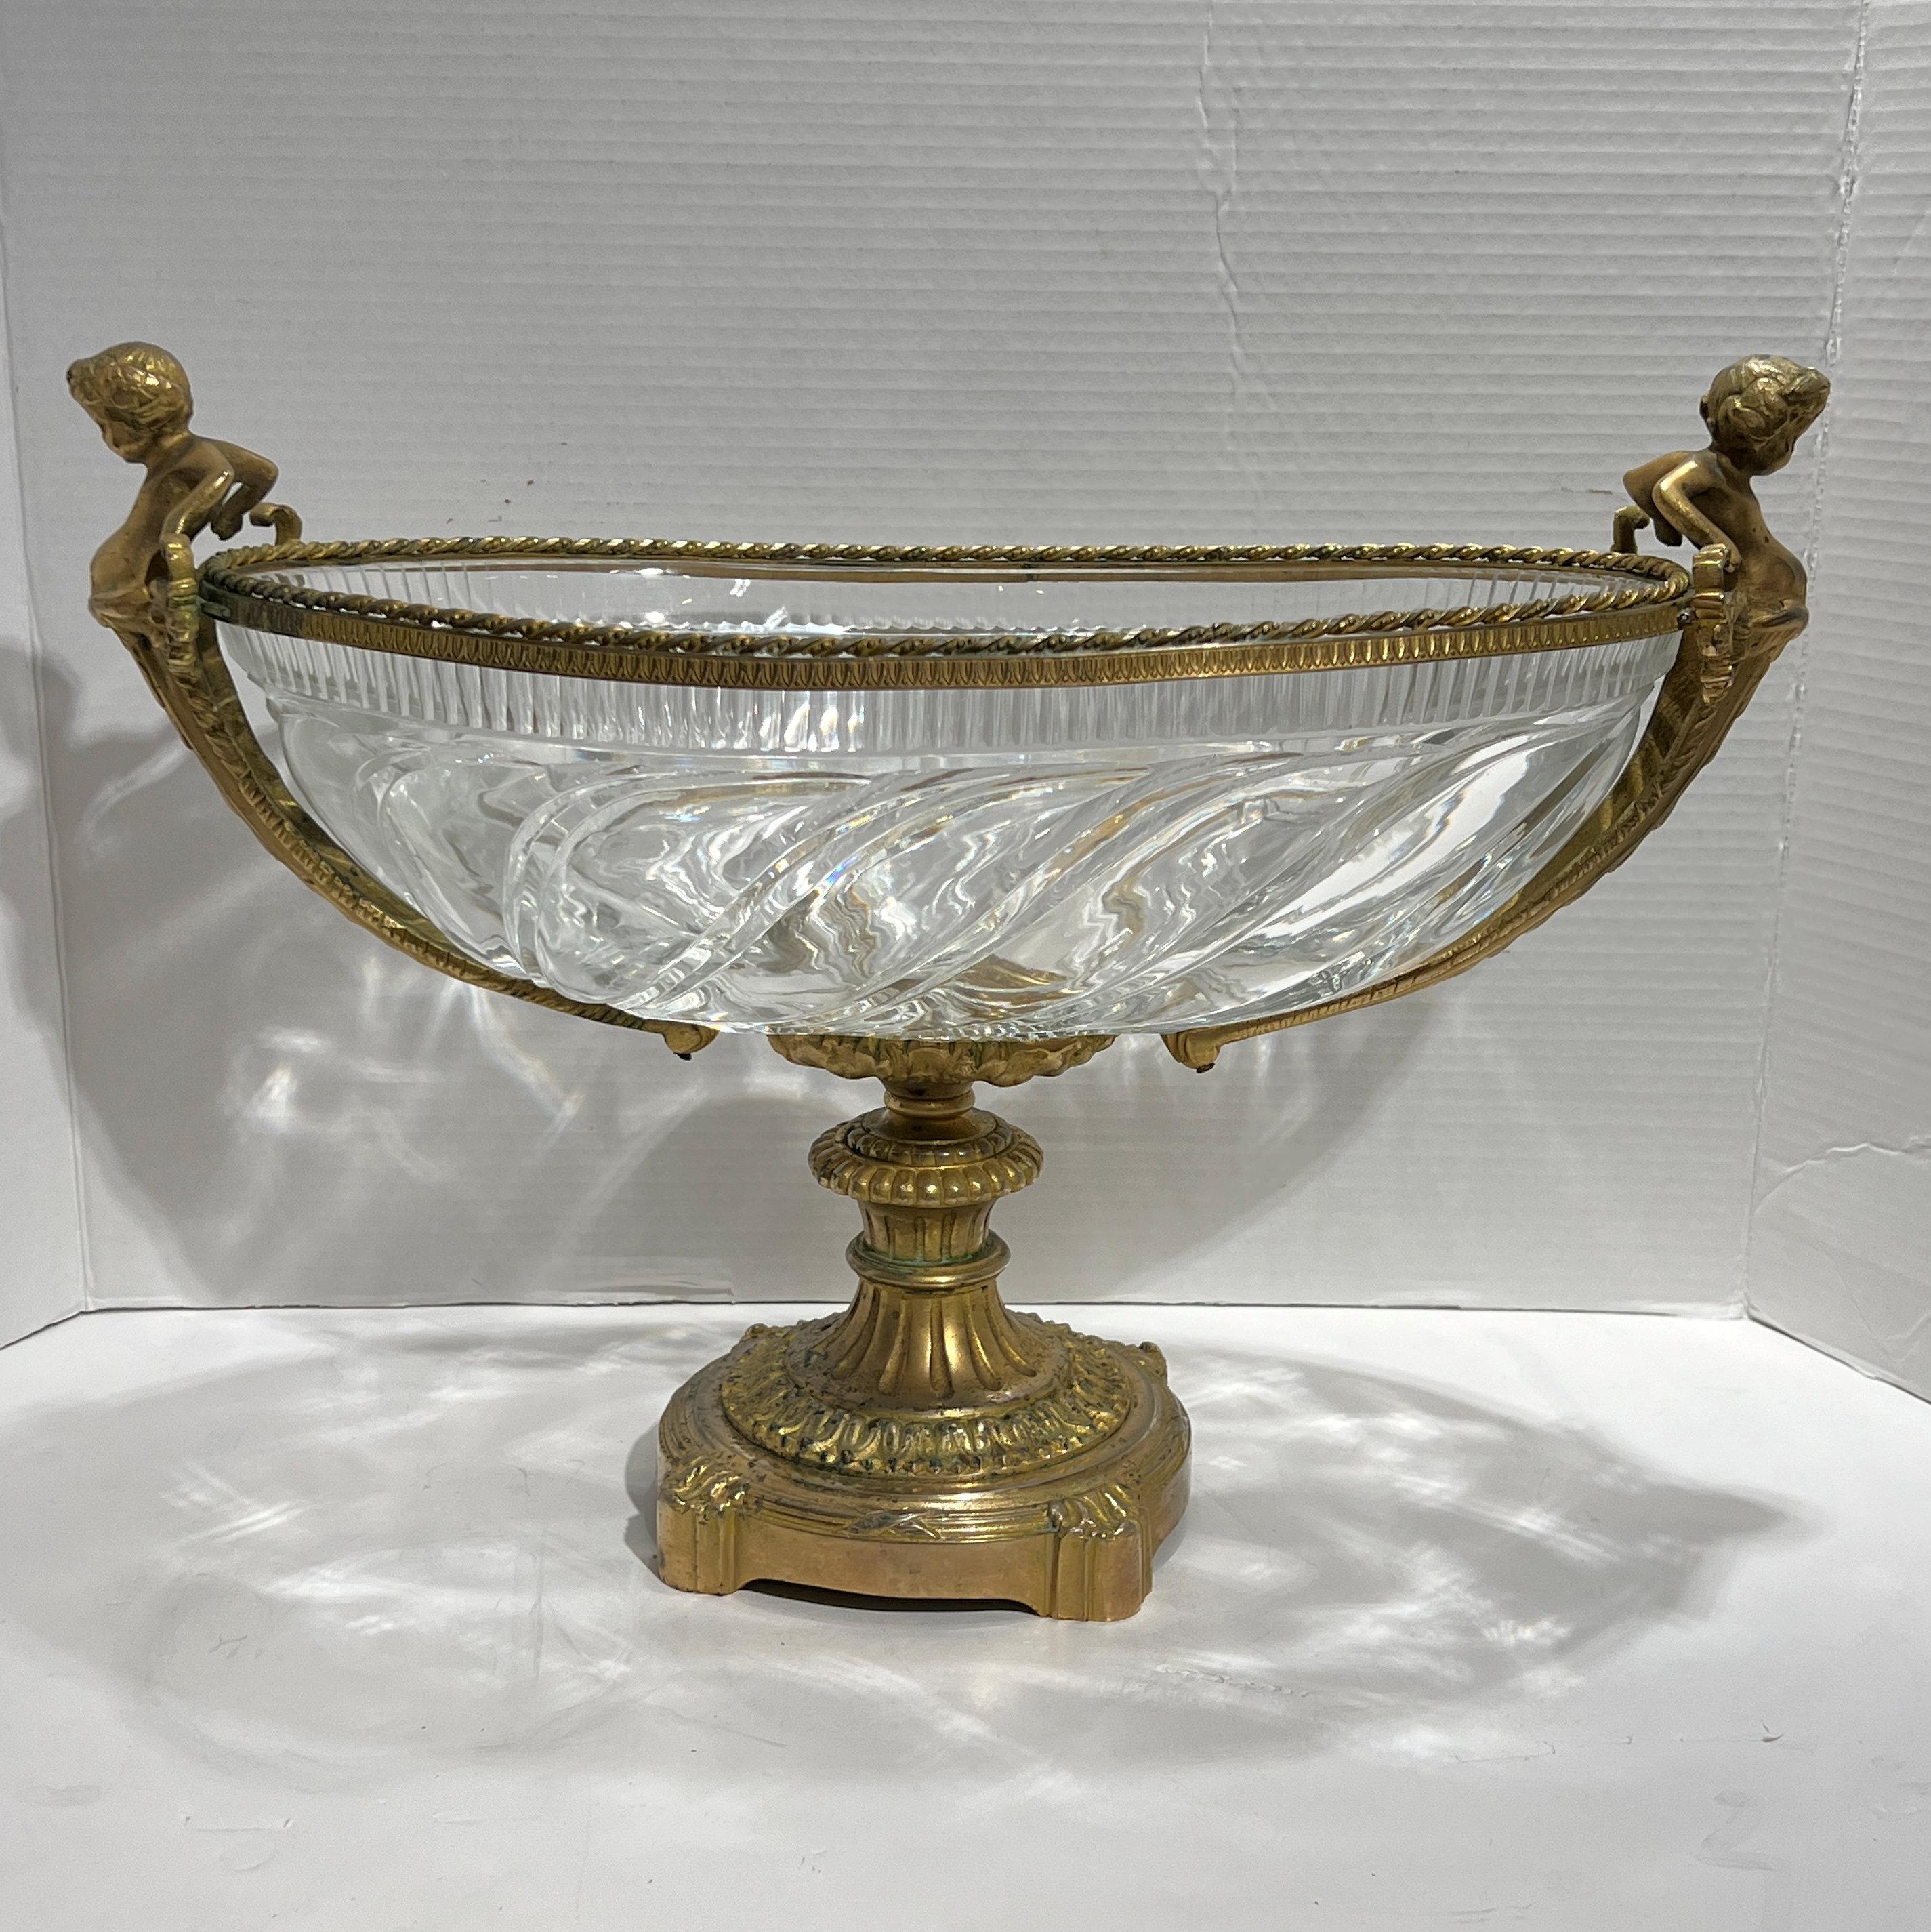 Neoclassical Revival Baccarat style Gilt Bronze Mounted Crystal Glass Centerpiece Bowl